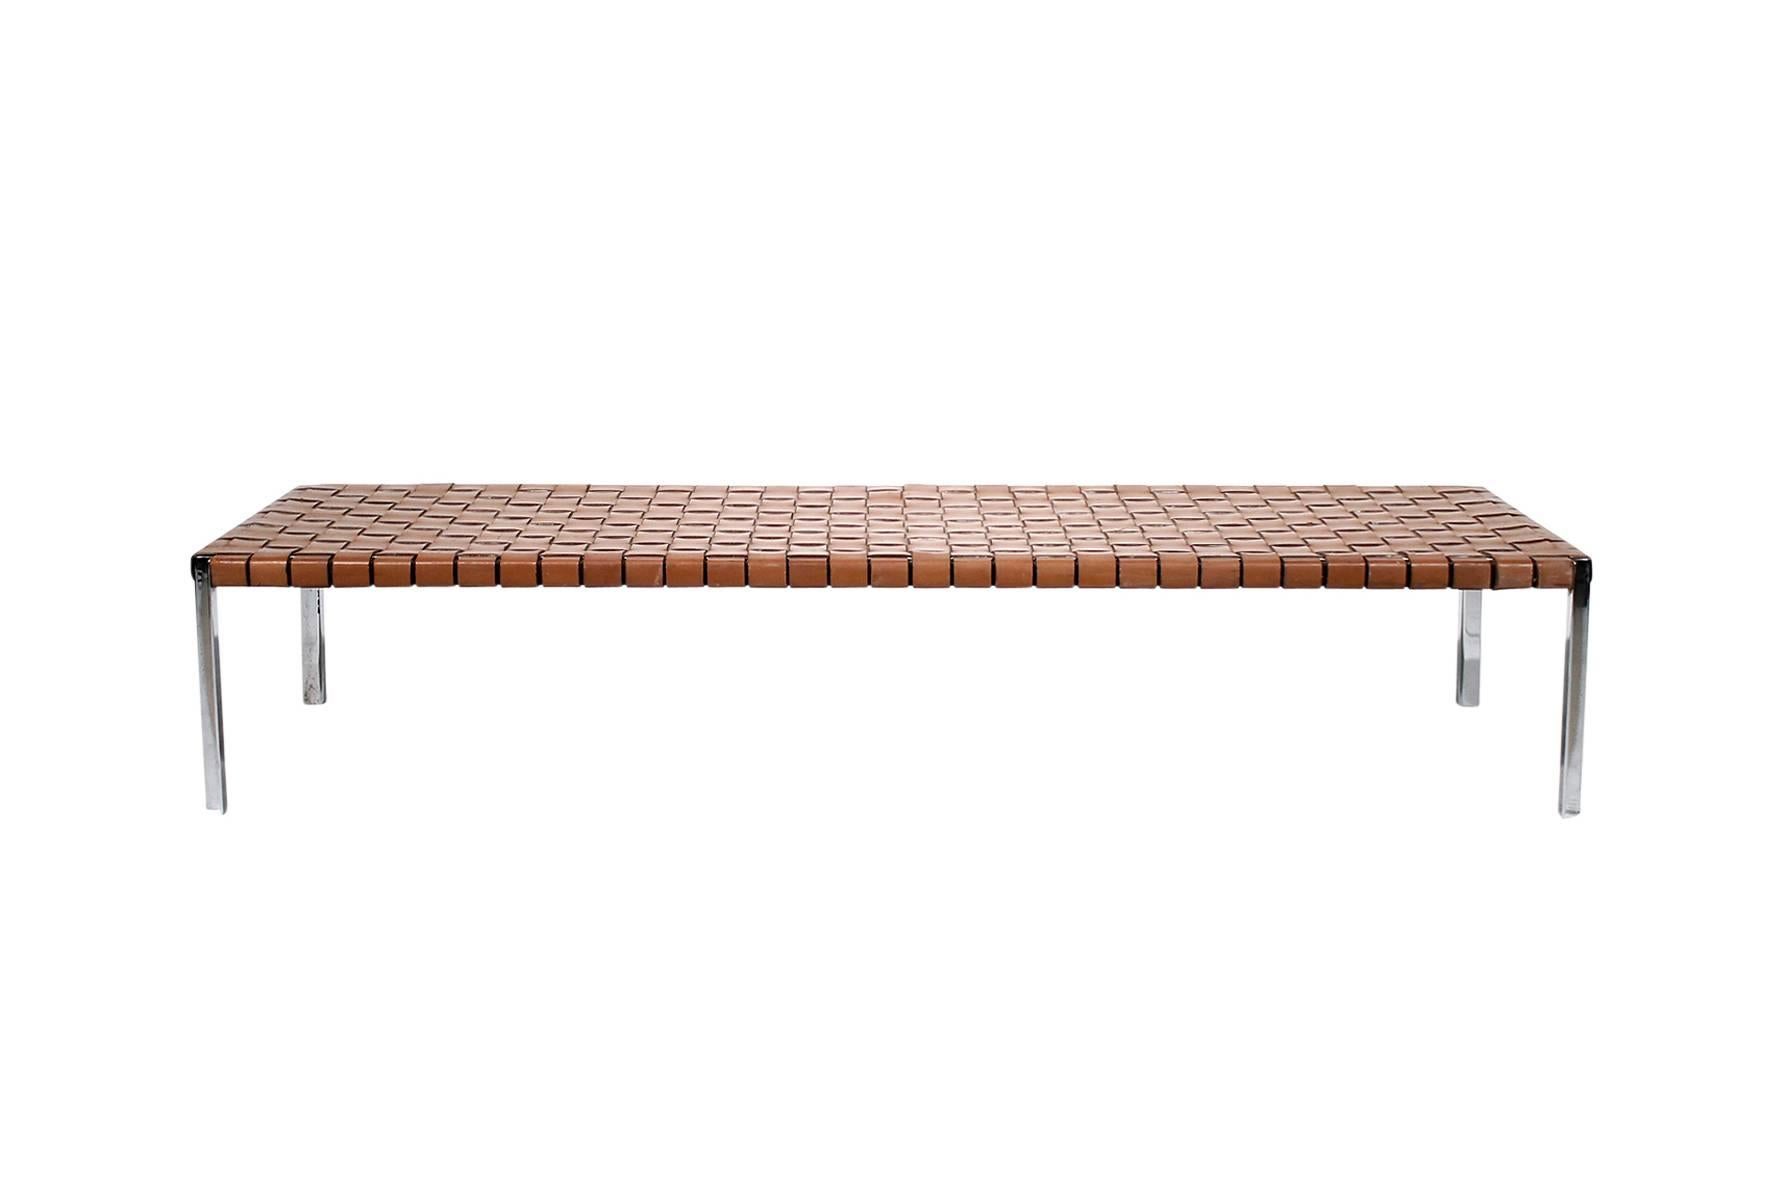 Large bench or daybed designed by Estelle and Erwine Laverne for the American company Laverne International. Chrome legs and steel supports with woven brown belting leather seats.